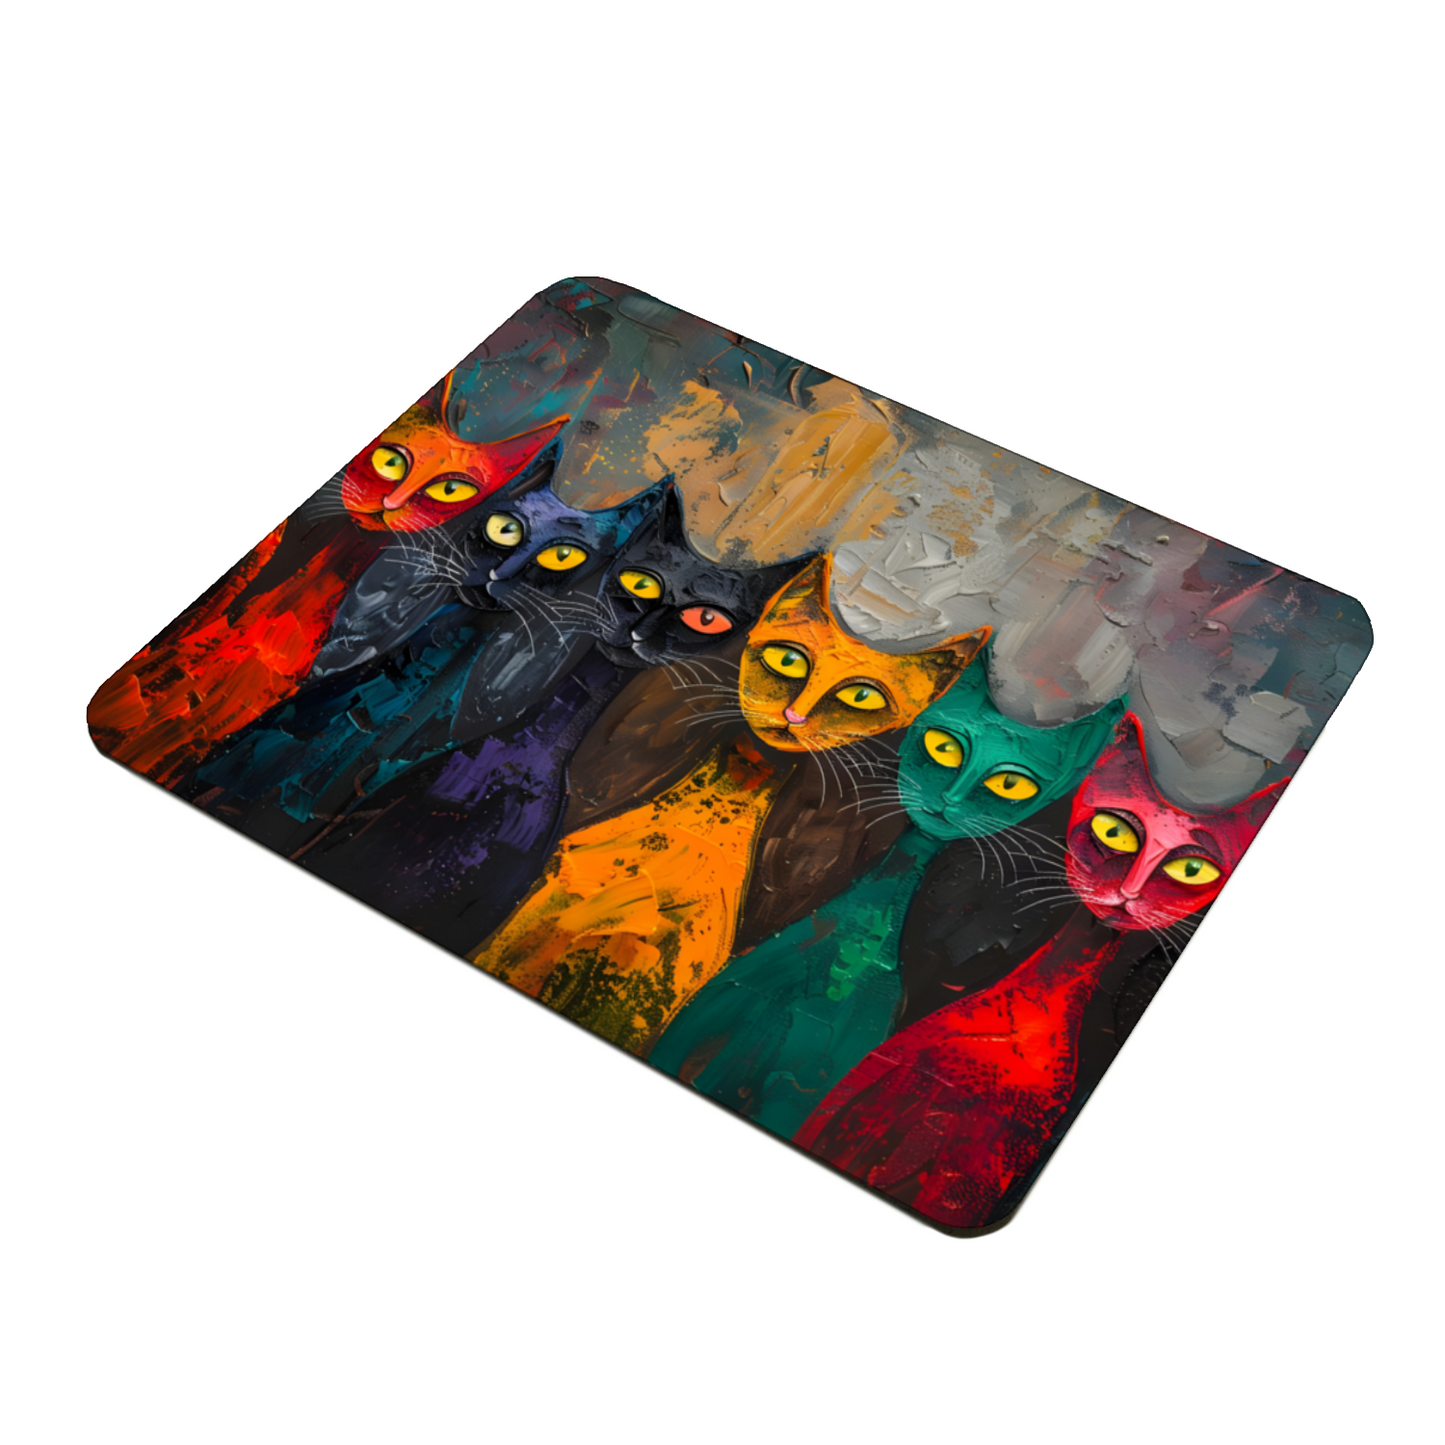 Council of Whiskers Wooden Placemat